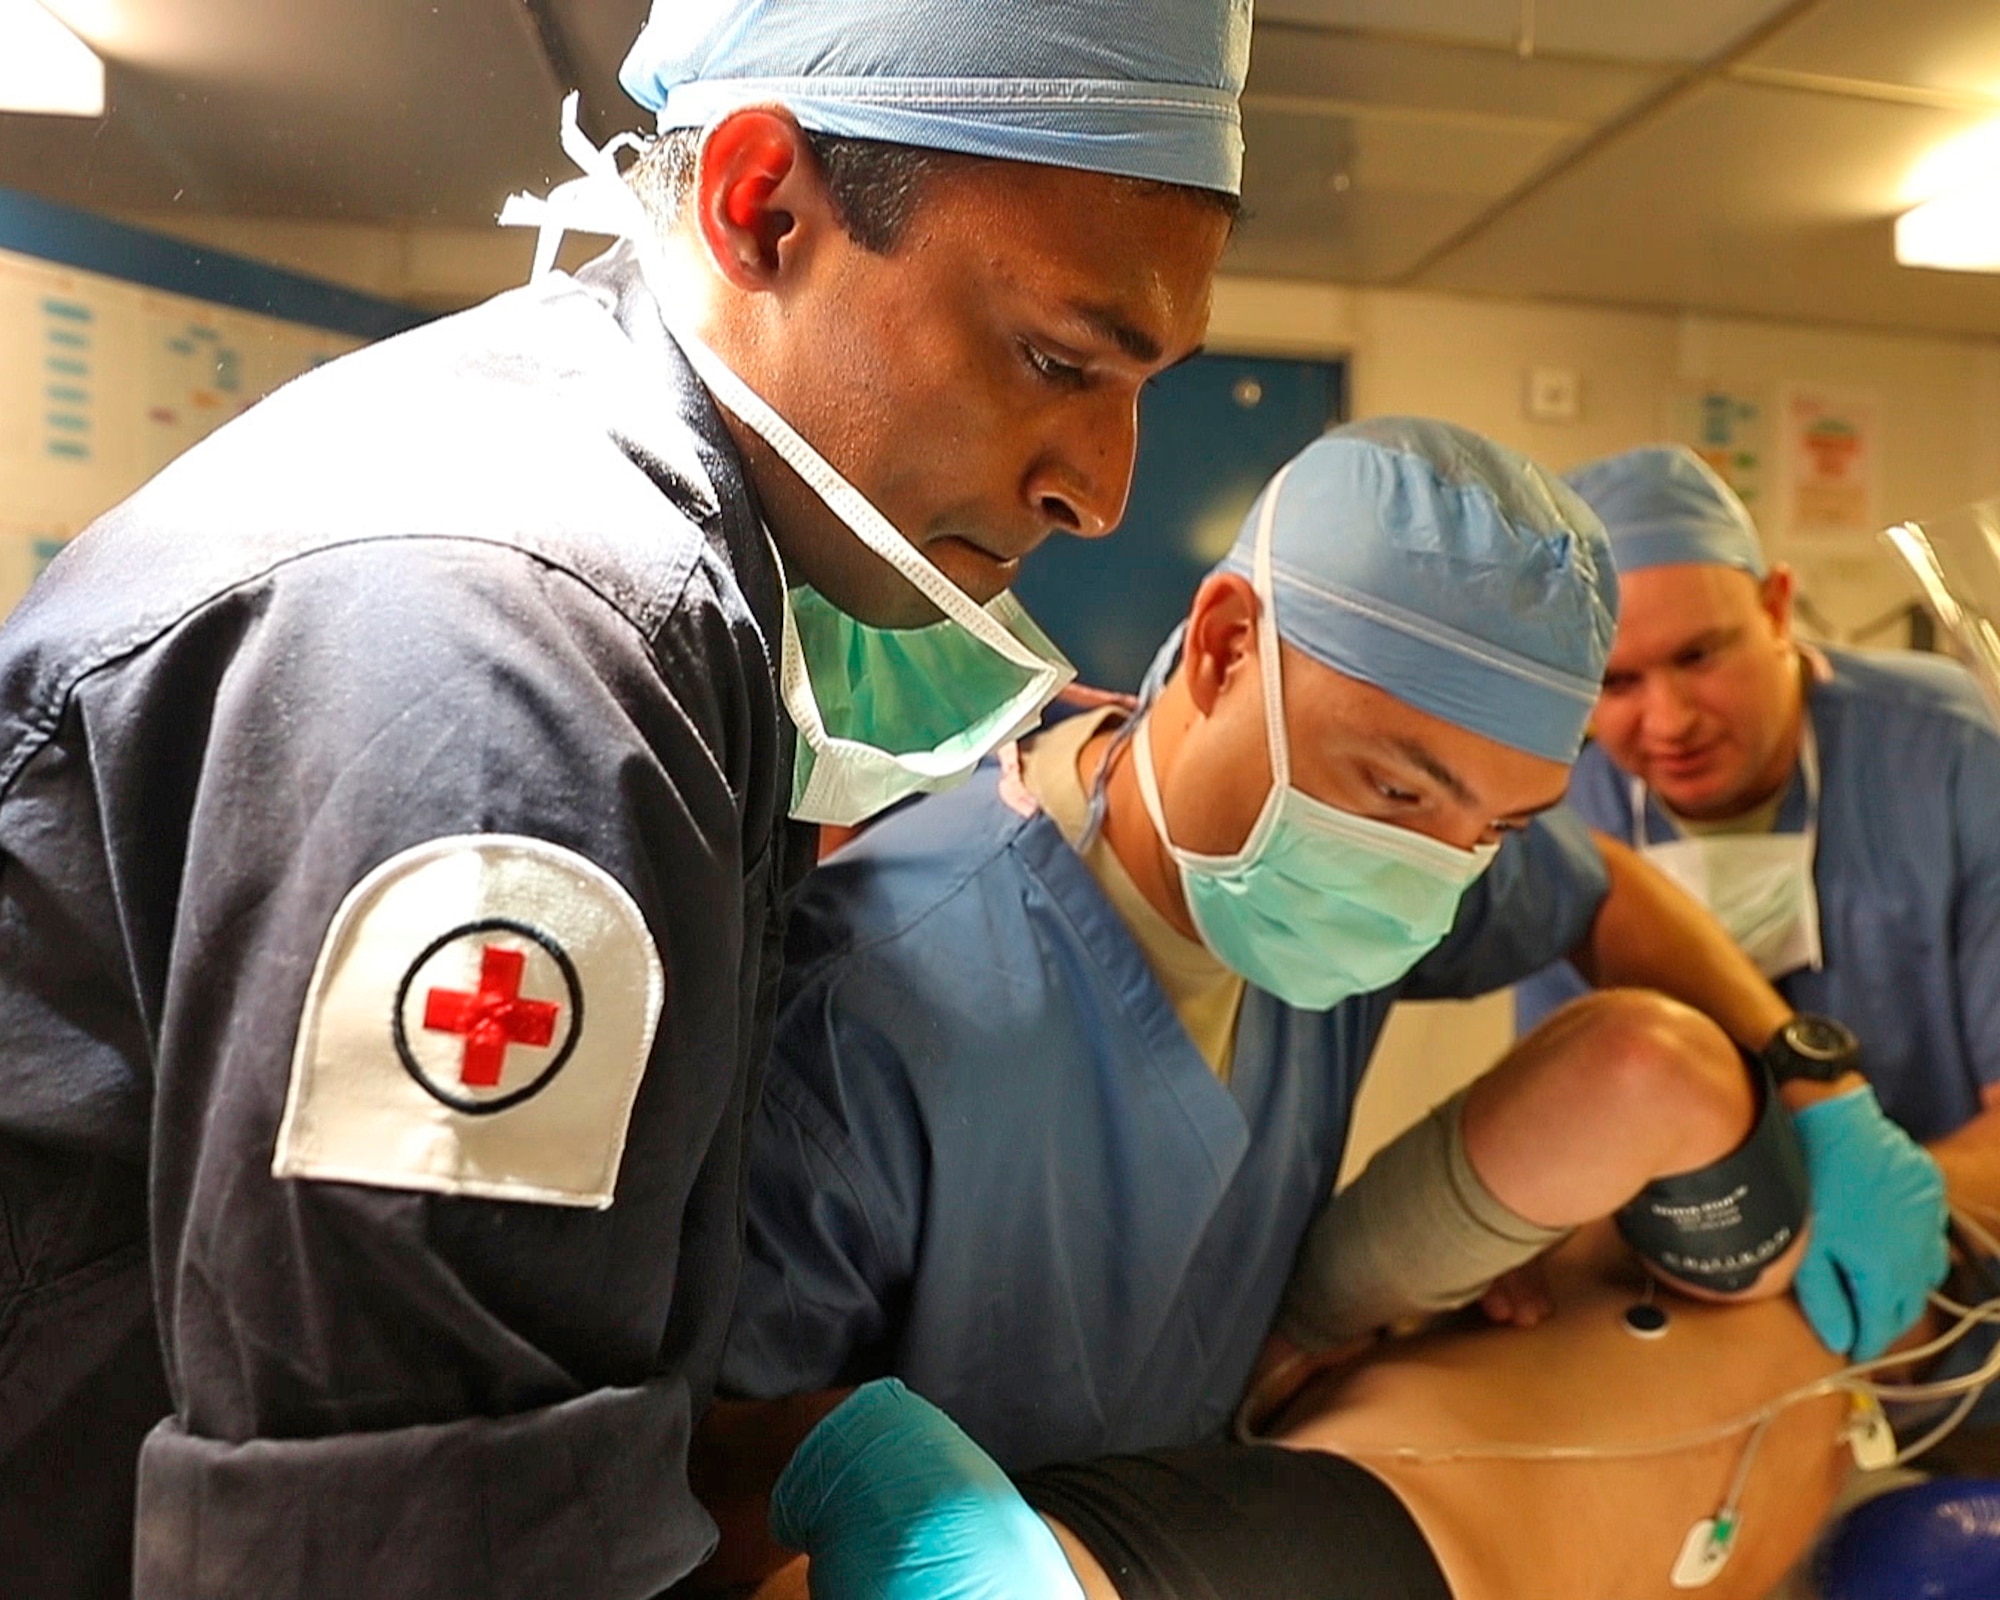 From left, LMT Shavi Locu-Enderage RN, U.S. Air Force Capt. Carlo Lobato, an anesthesiologist with the 379th Expeditionary Medical Operations Squadron, and U.S. Air Force Capt. Omar Carrasco, an operating room nurse with the 379th EMDOS, conduct a full body survey of a Royal Marine with simulated injuries onboard the HMS Ocean, Jan. 26, 2017. Members of the Royal Navy and 379th EMDOS came together during coalition exercise Azraq Serpent to simulate receiving casualties in a maritime environment. (Courtesy photo, Royal Navy)